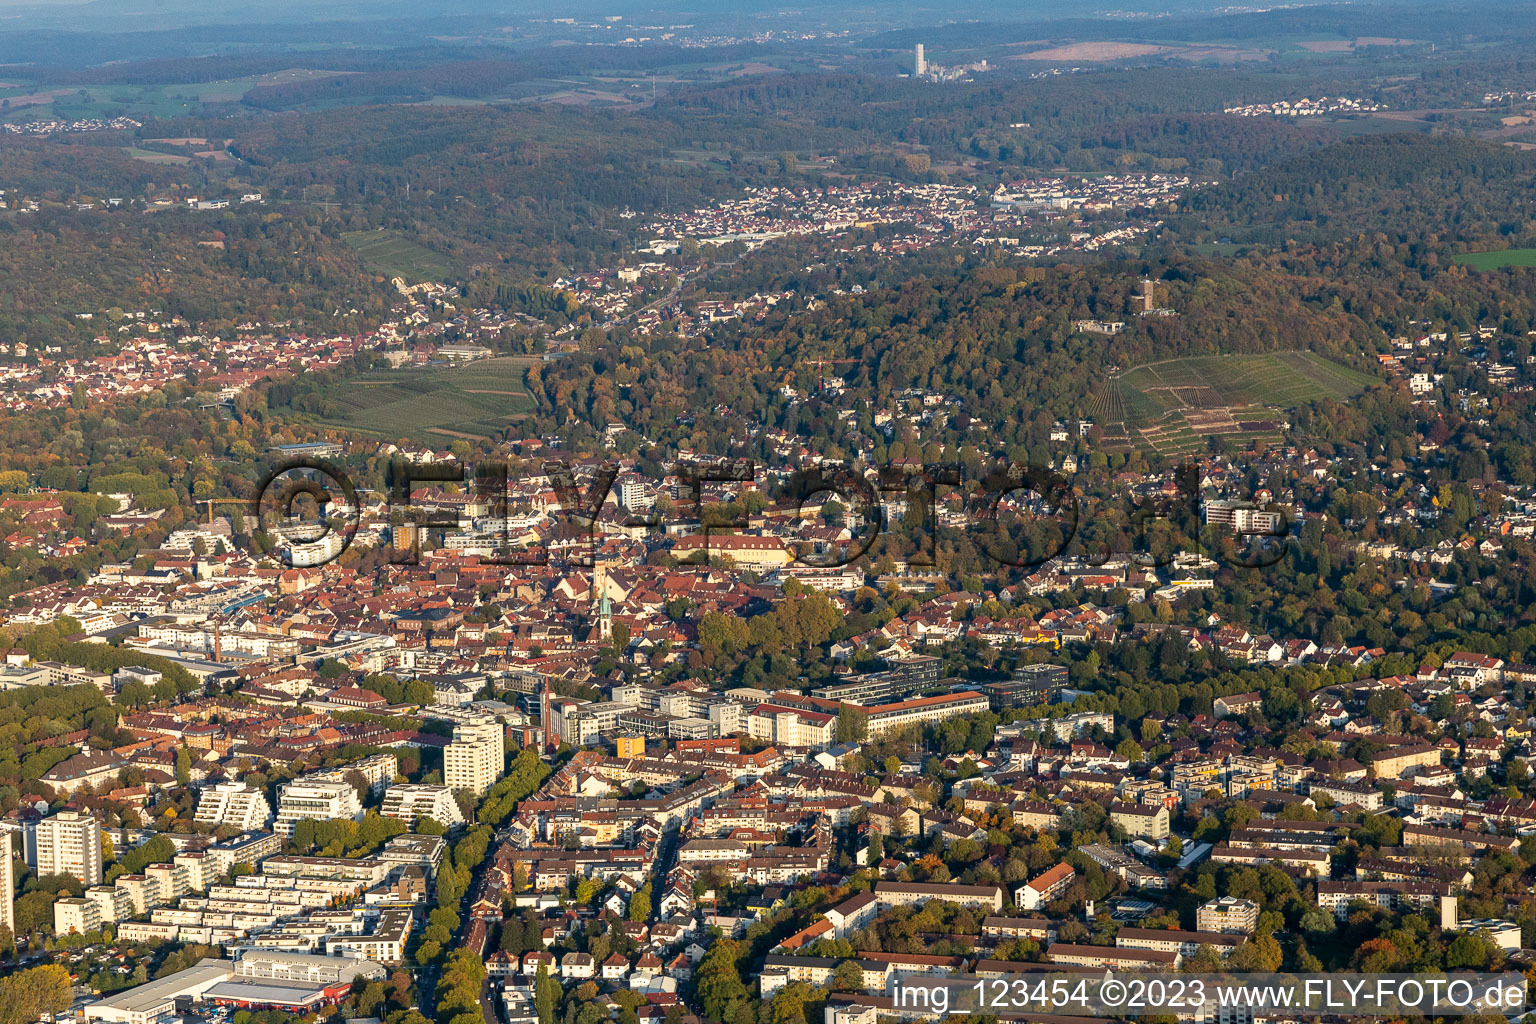 Old town under Turmberg in the district Durlach in Karlsruhe in the state Baden-Wuerttemberg, Germany